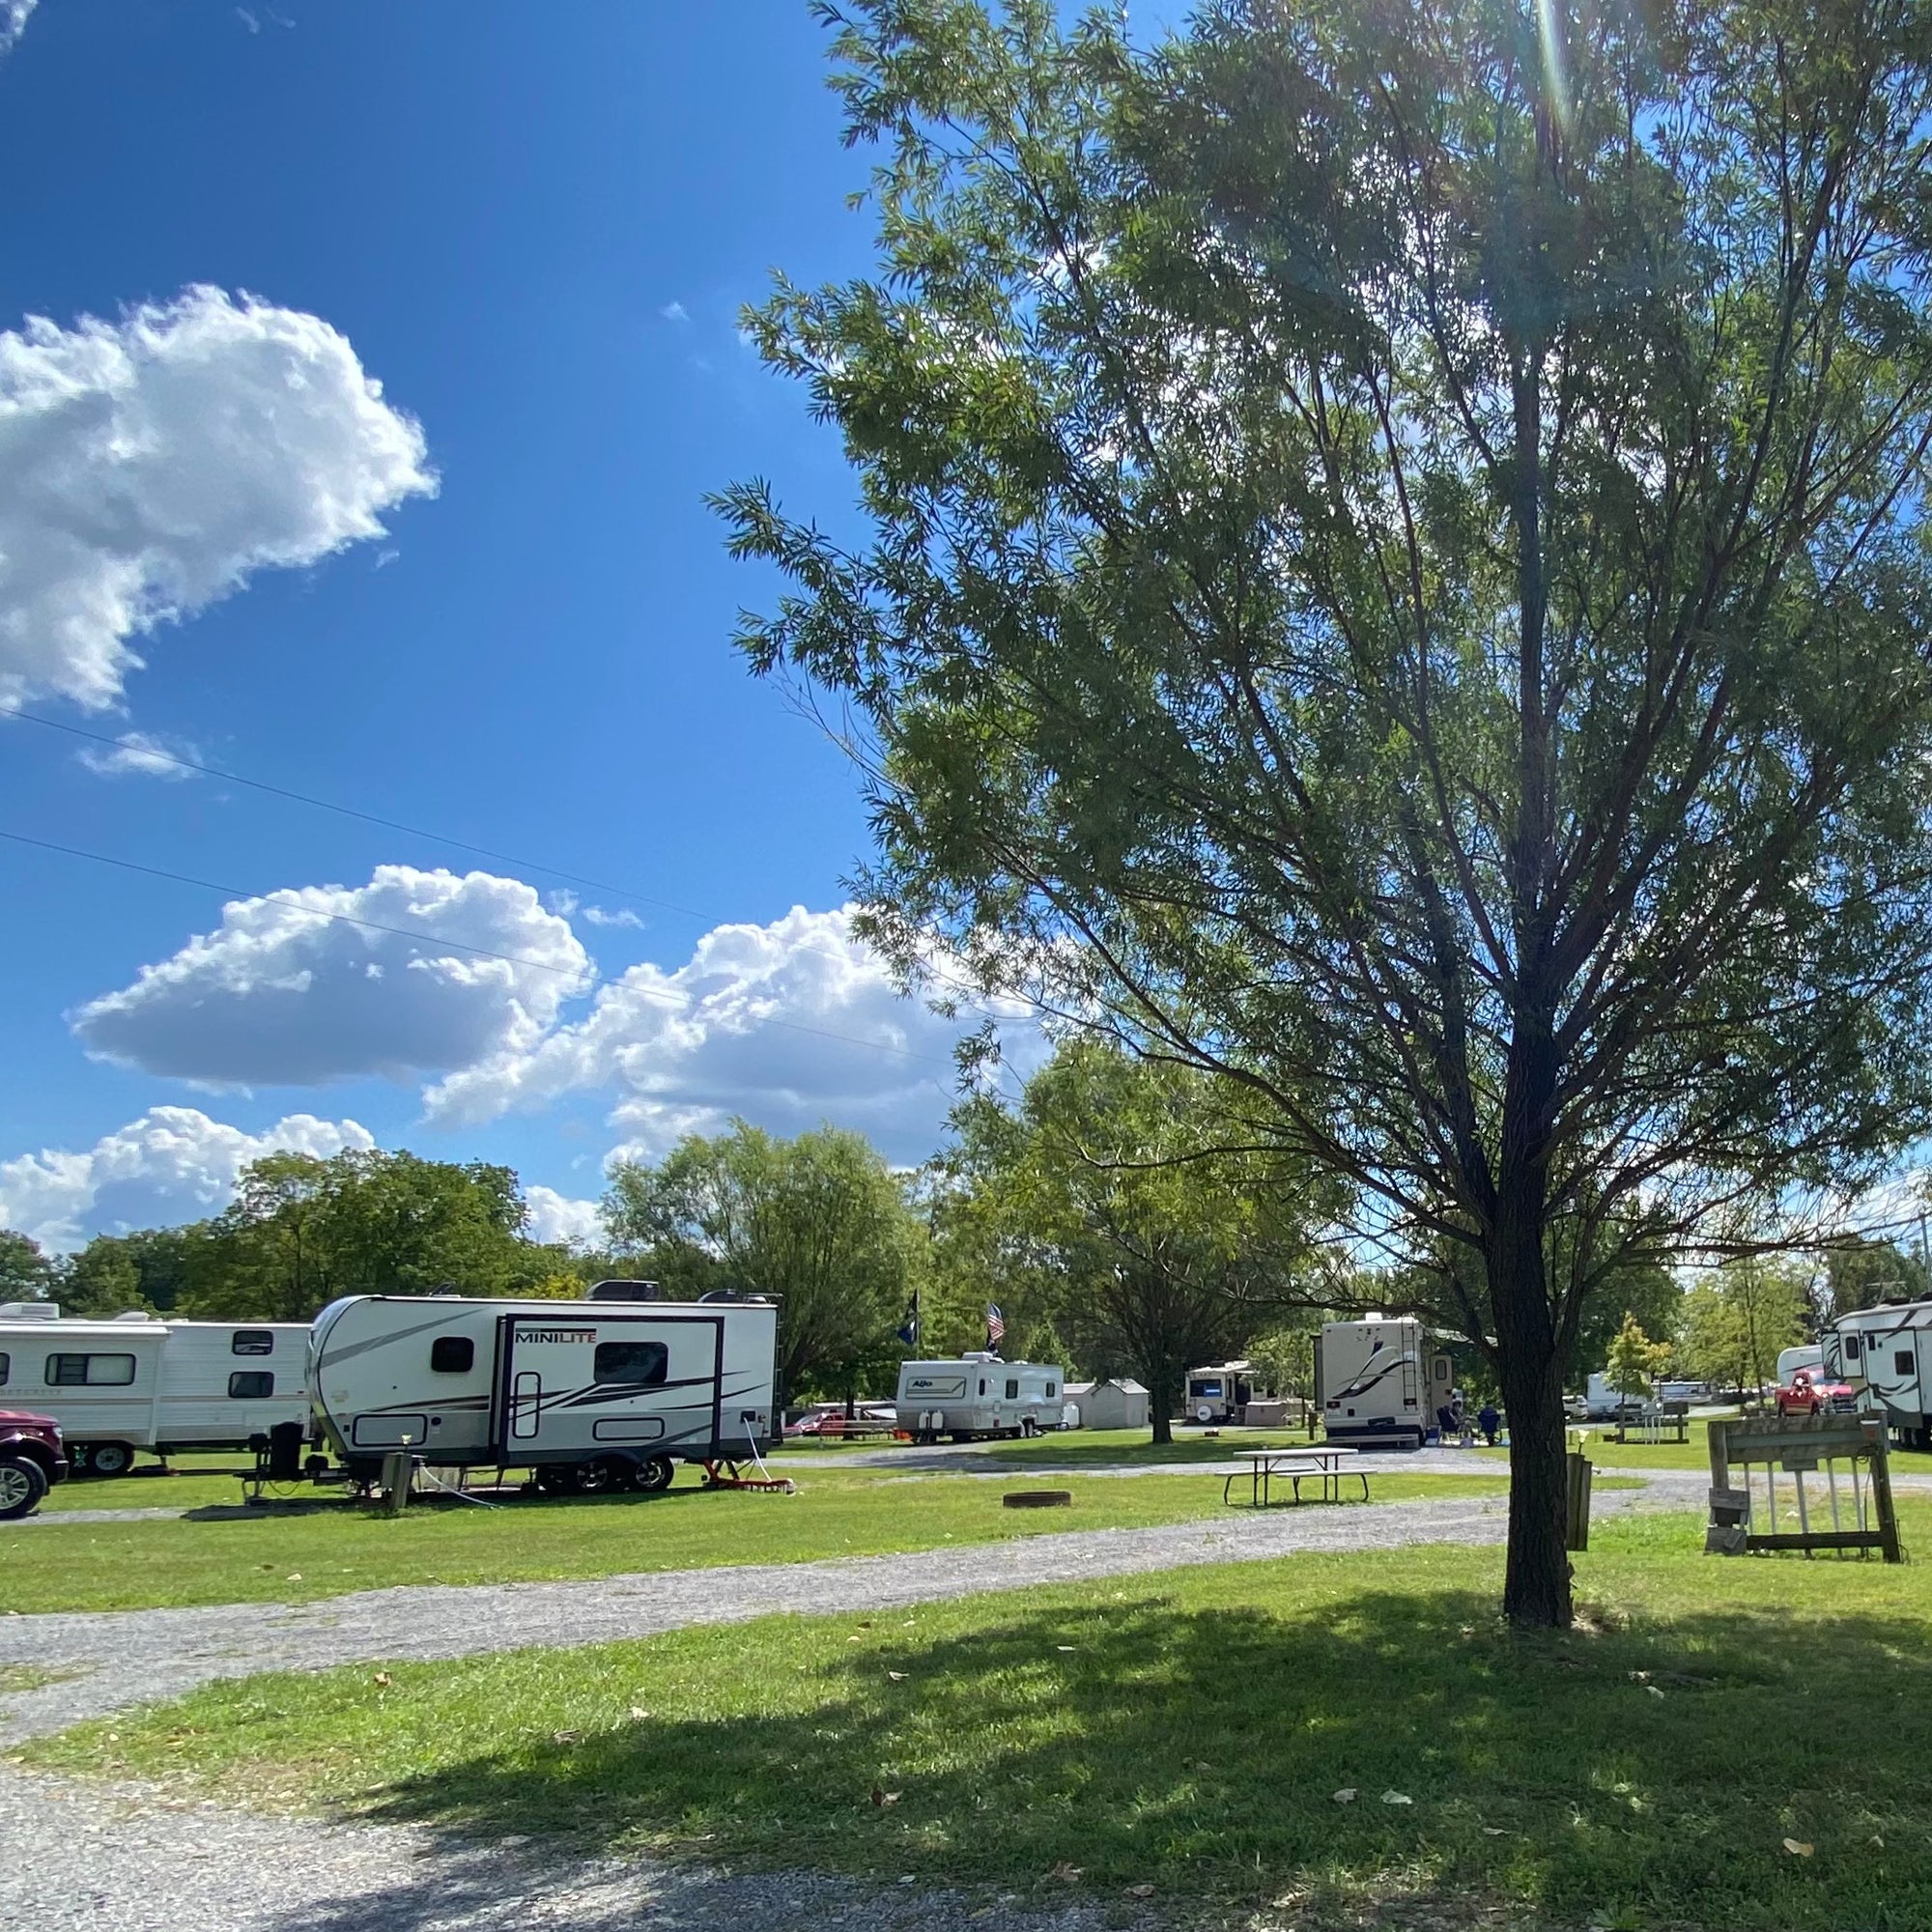 overview of the pull thru rv sites at happy acres campground. shows 4 rvs